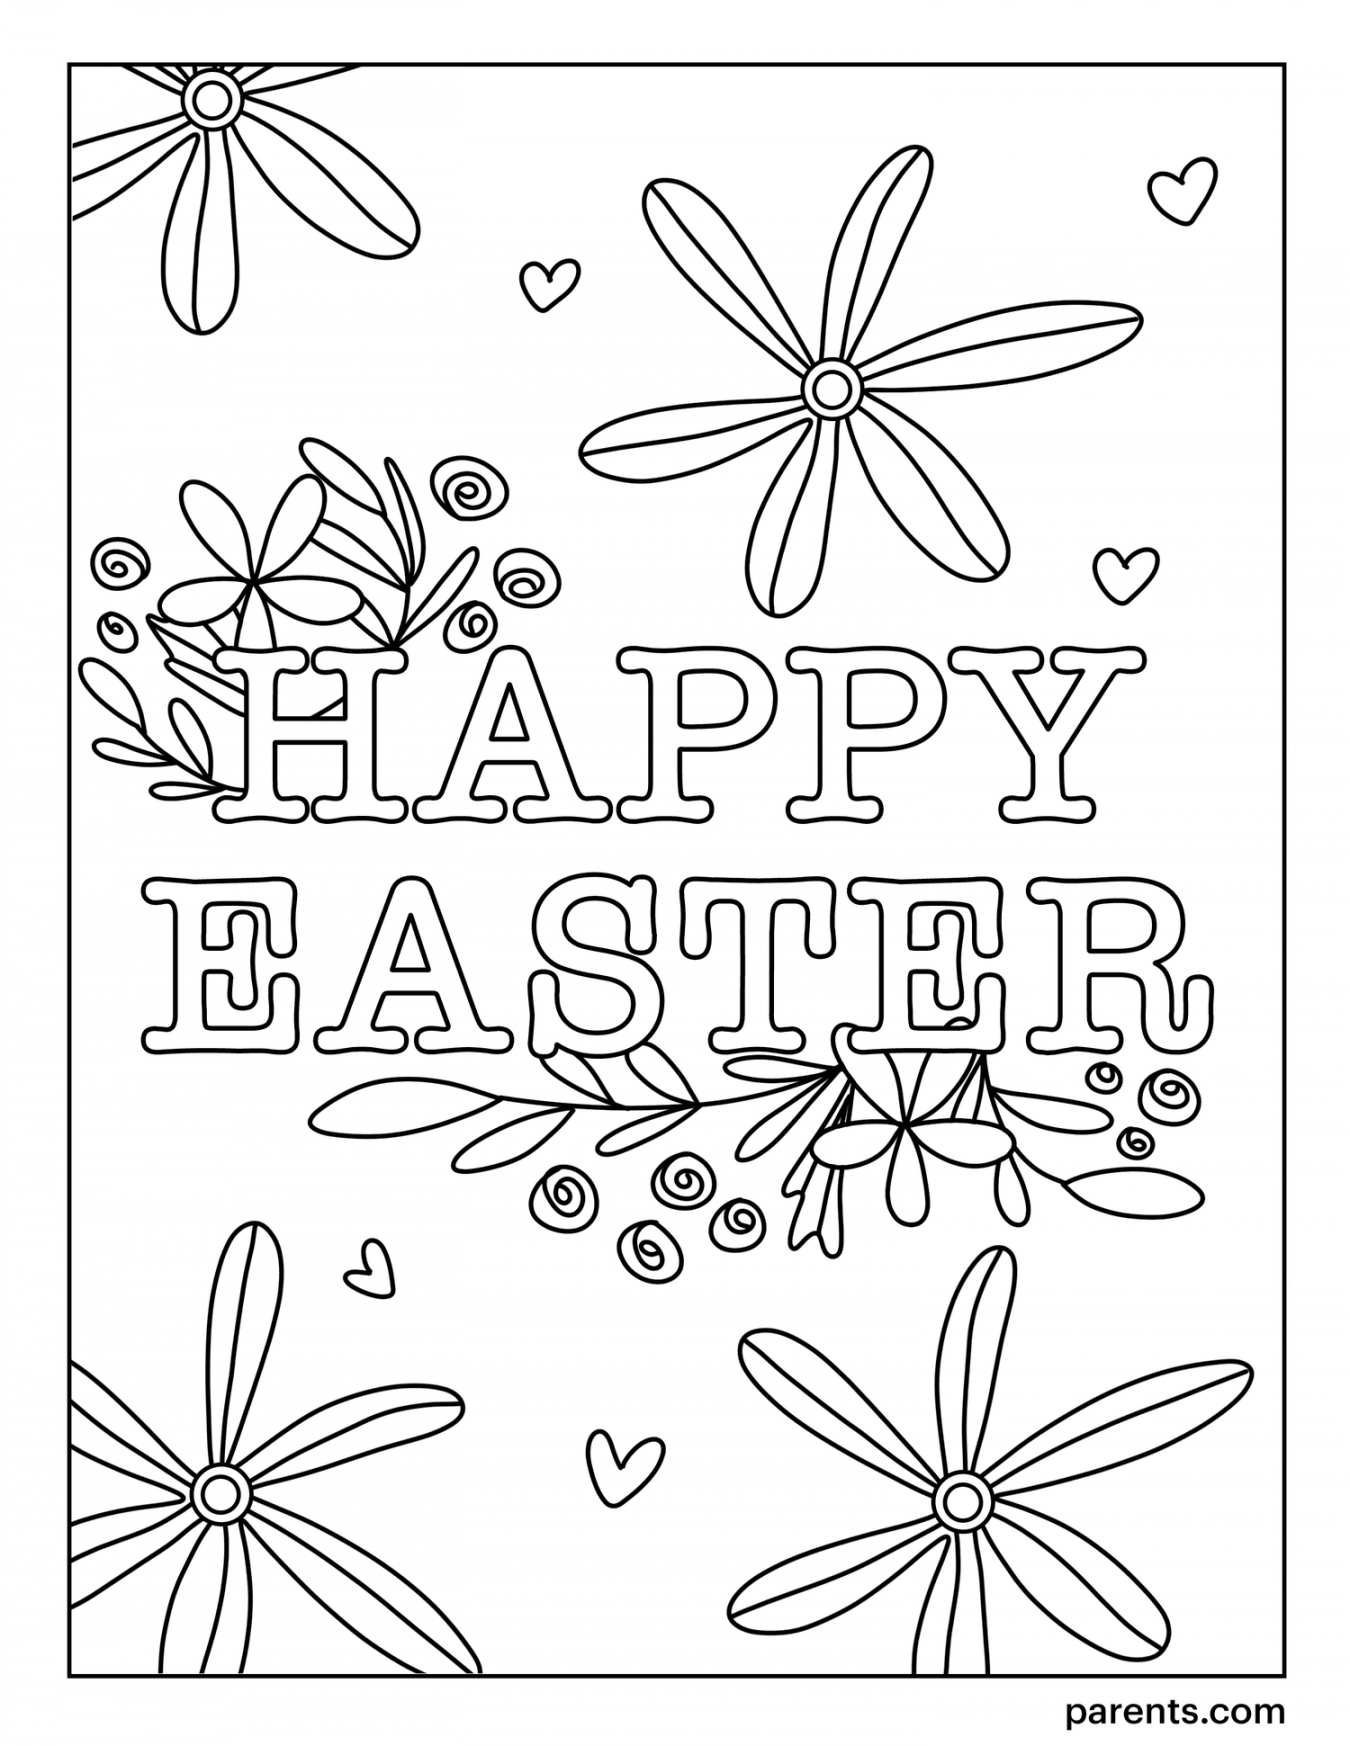 Free Easter Coloring Pages Printable - Printable -  Free Easter Coloring Pages for Kids